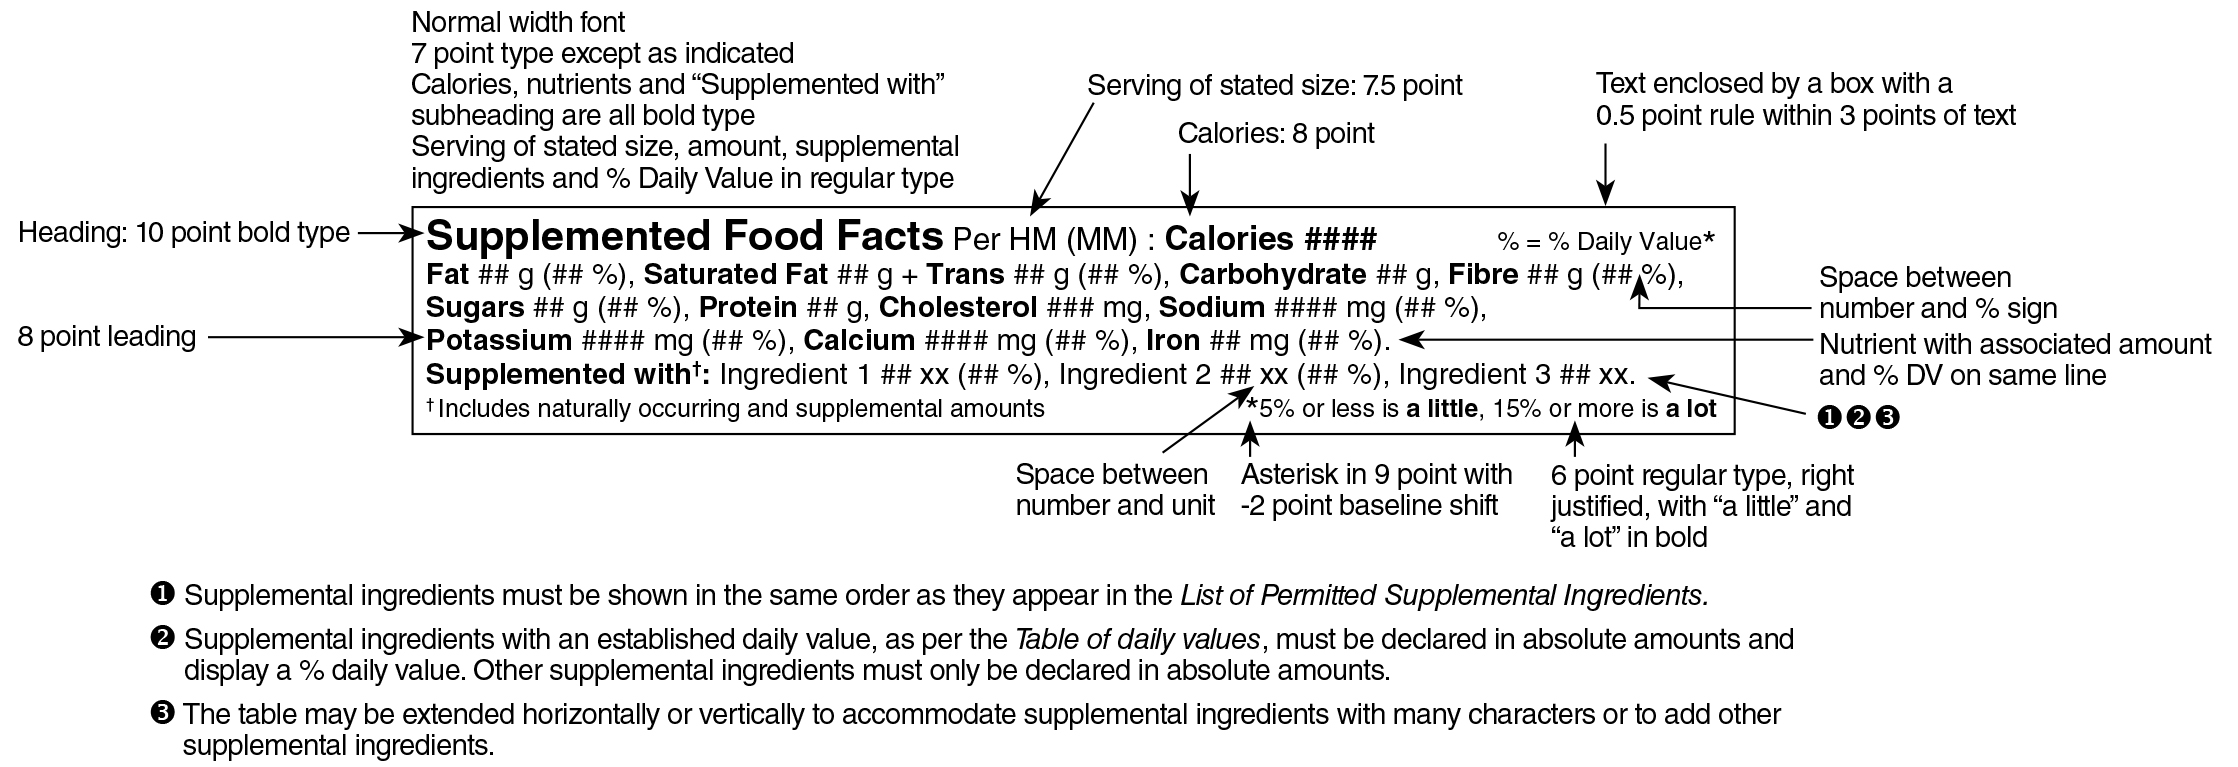 An English Supplemented Food Facts table in linear format surrounded by specifications. Text version below.